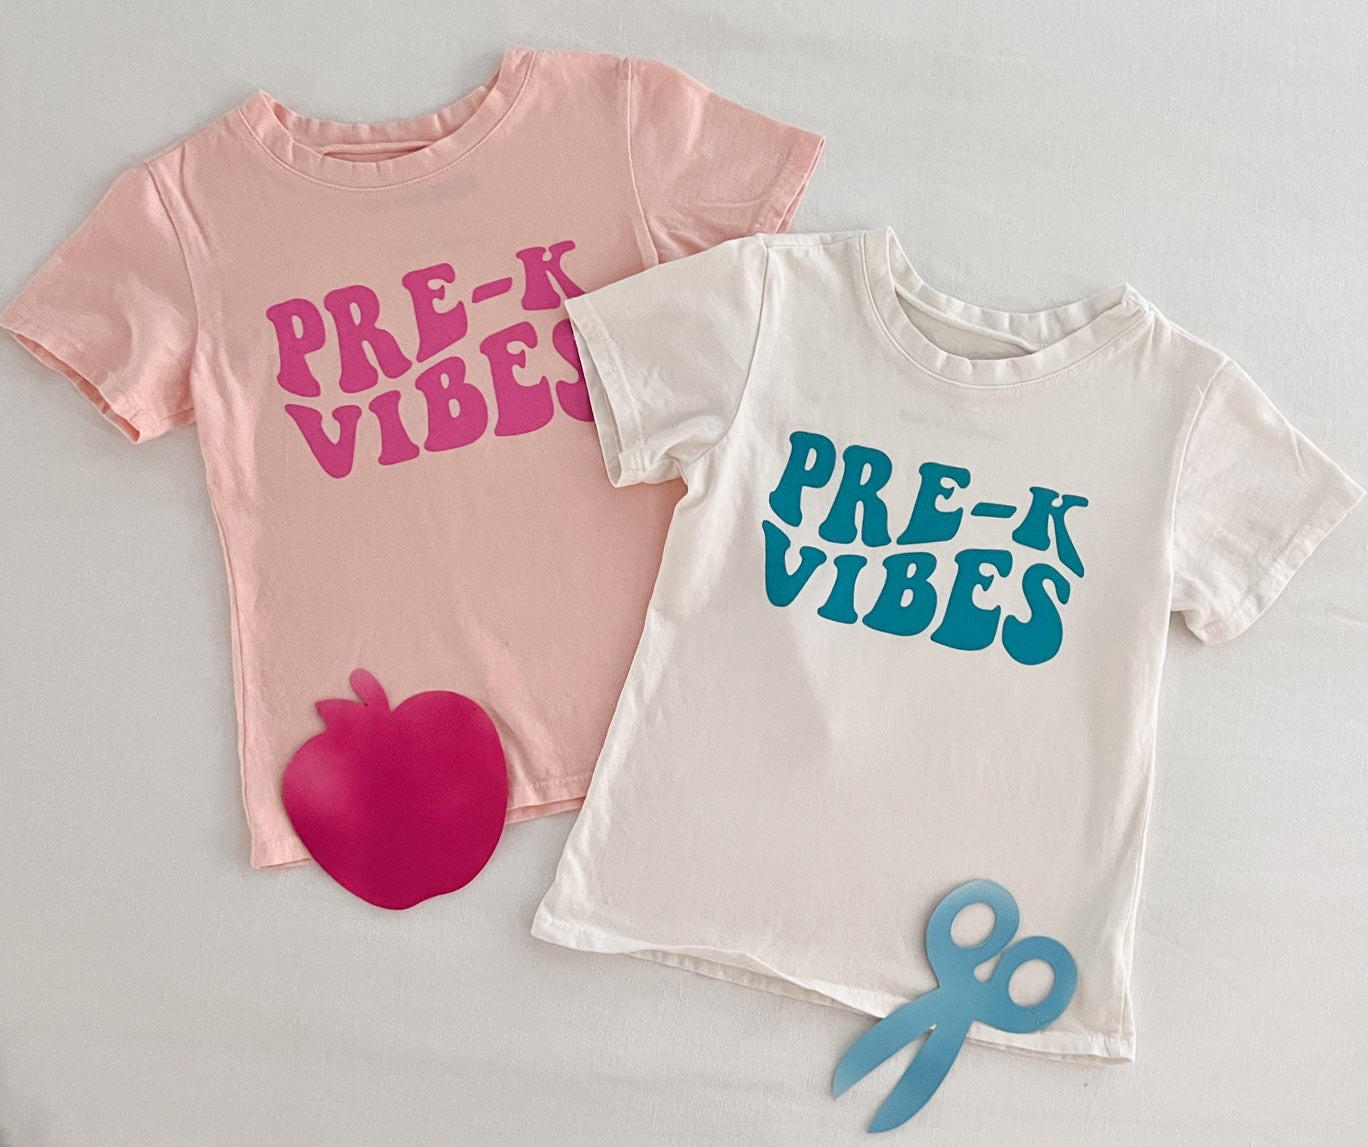 Pre-K Vibes in Coconut or Shell Pink